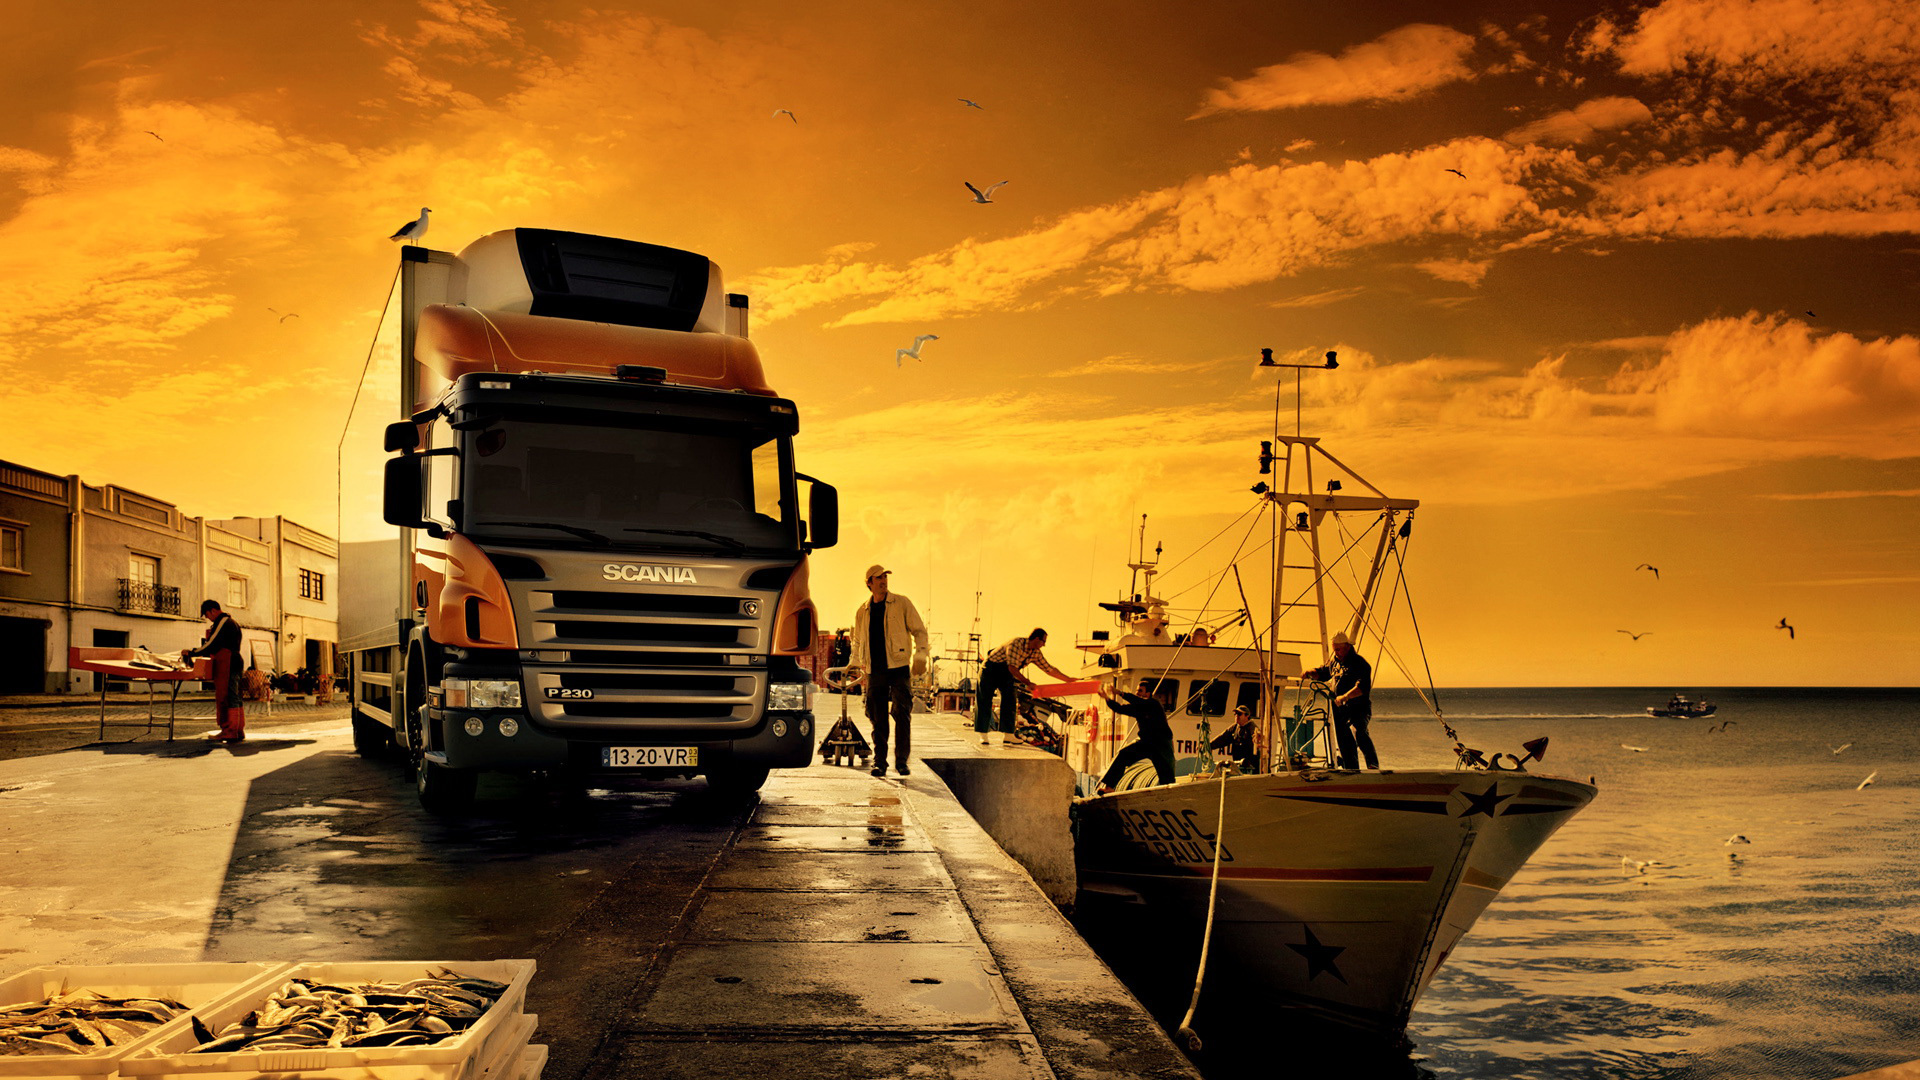 Awesome Orange Scania Truck Wallpaper PC Wallpaper with 1920x1080